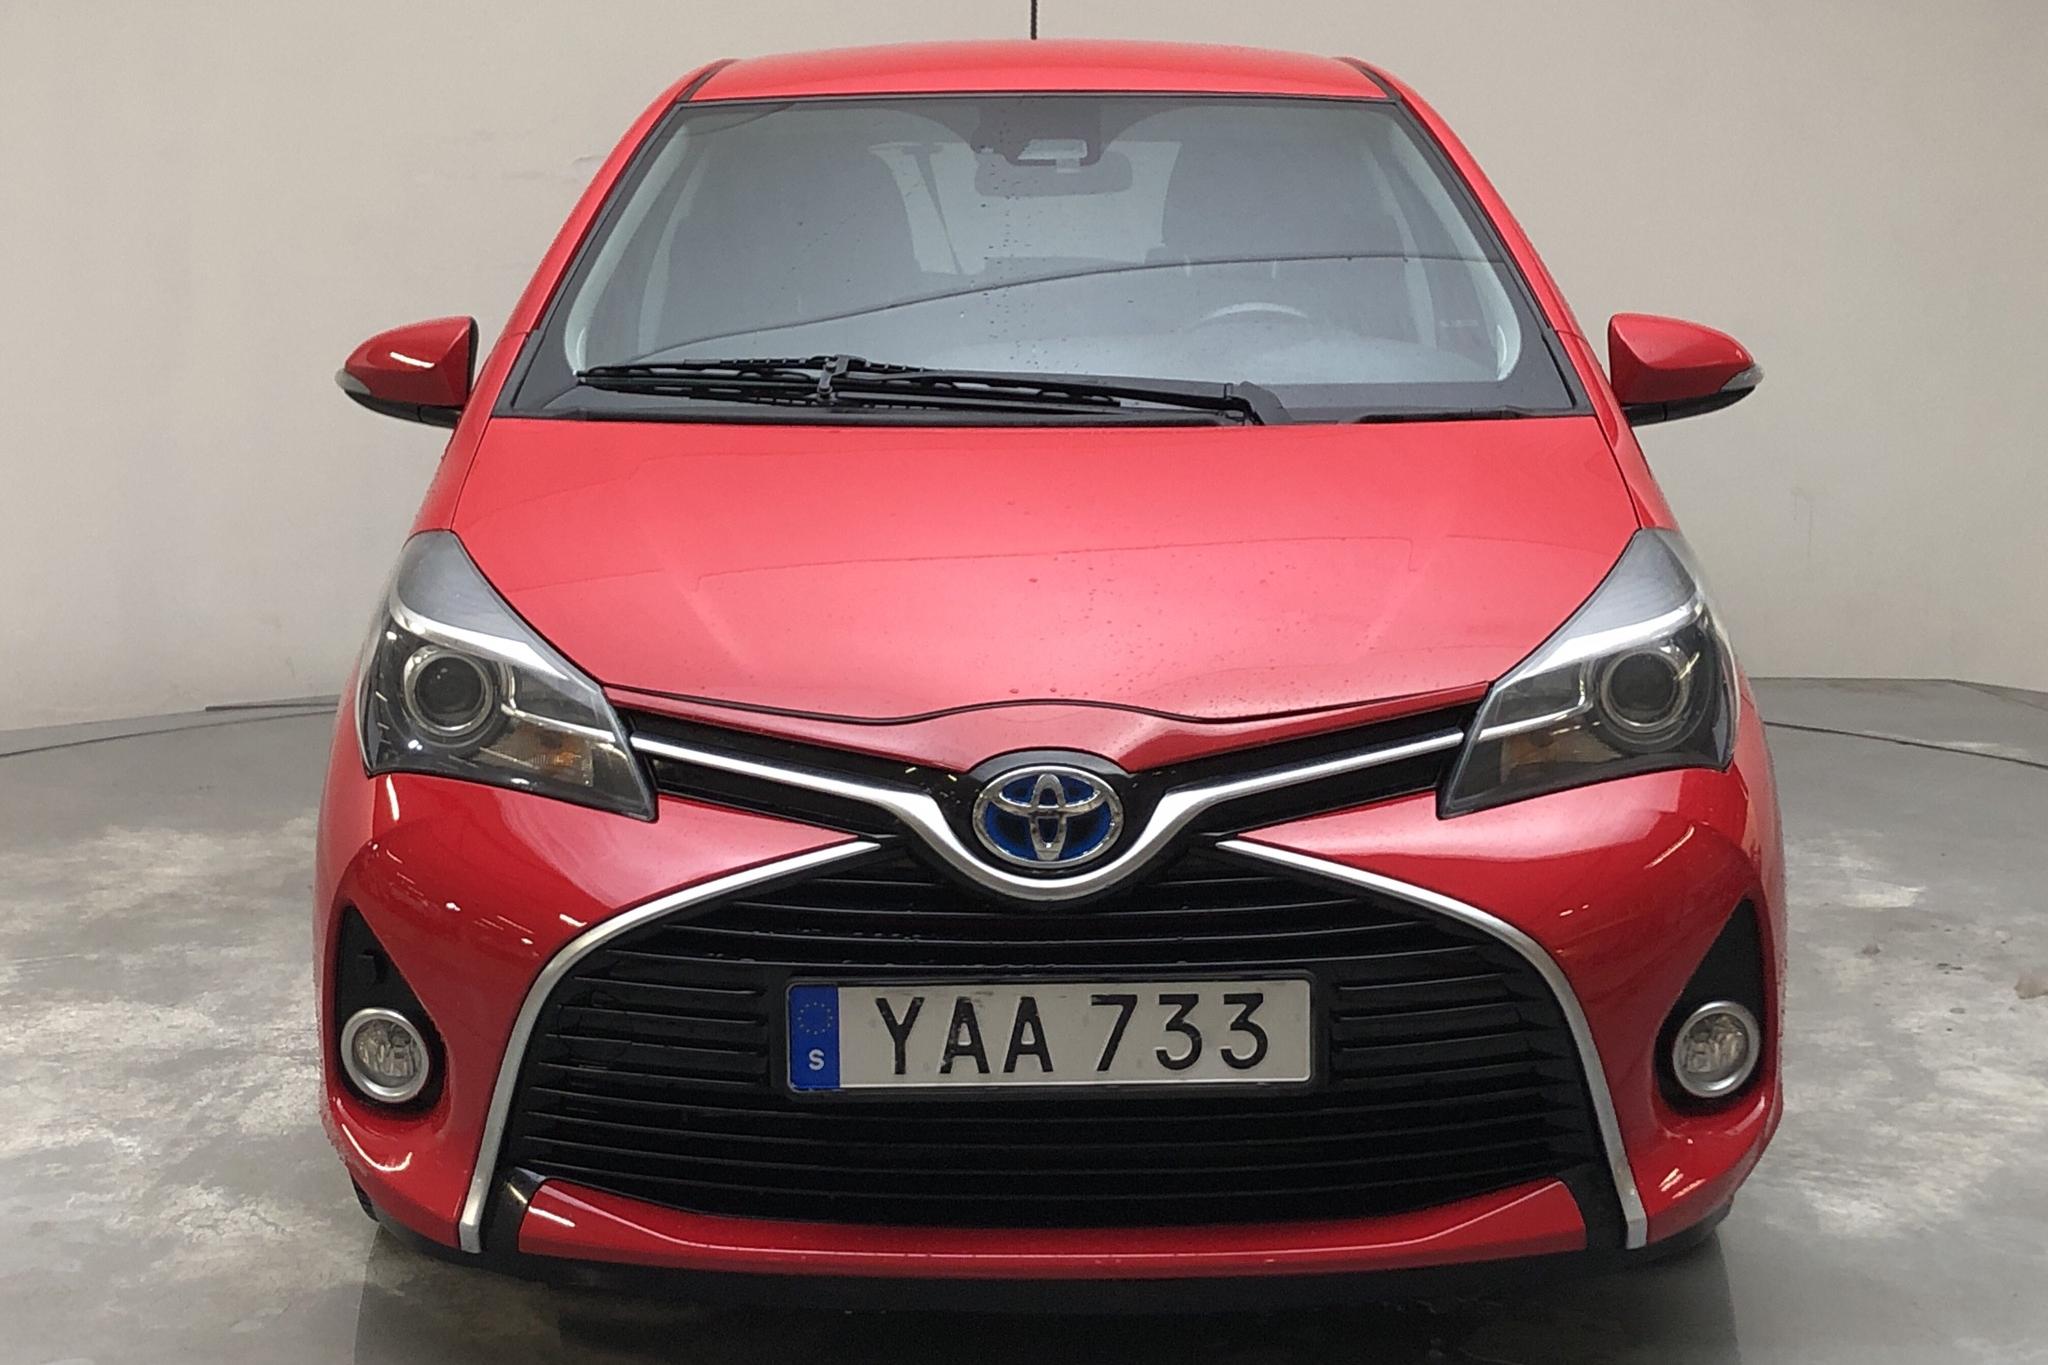 Toyota Yaris 1.5 HSD 5dr (75hk) - 98 850 km - Automatic - red - 2016